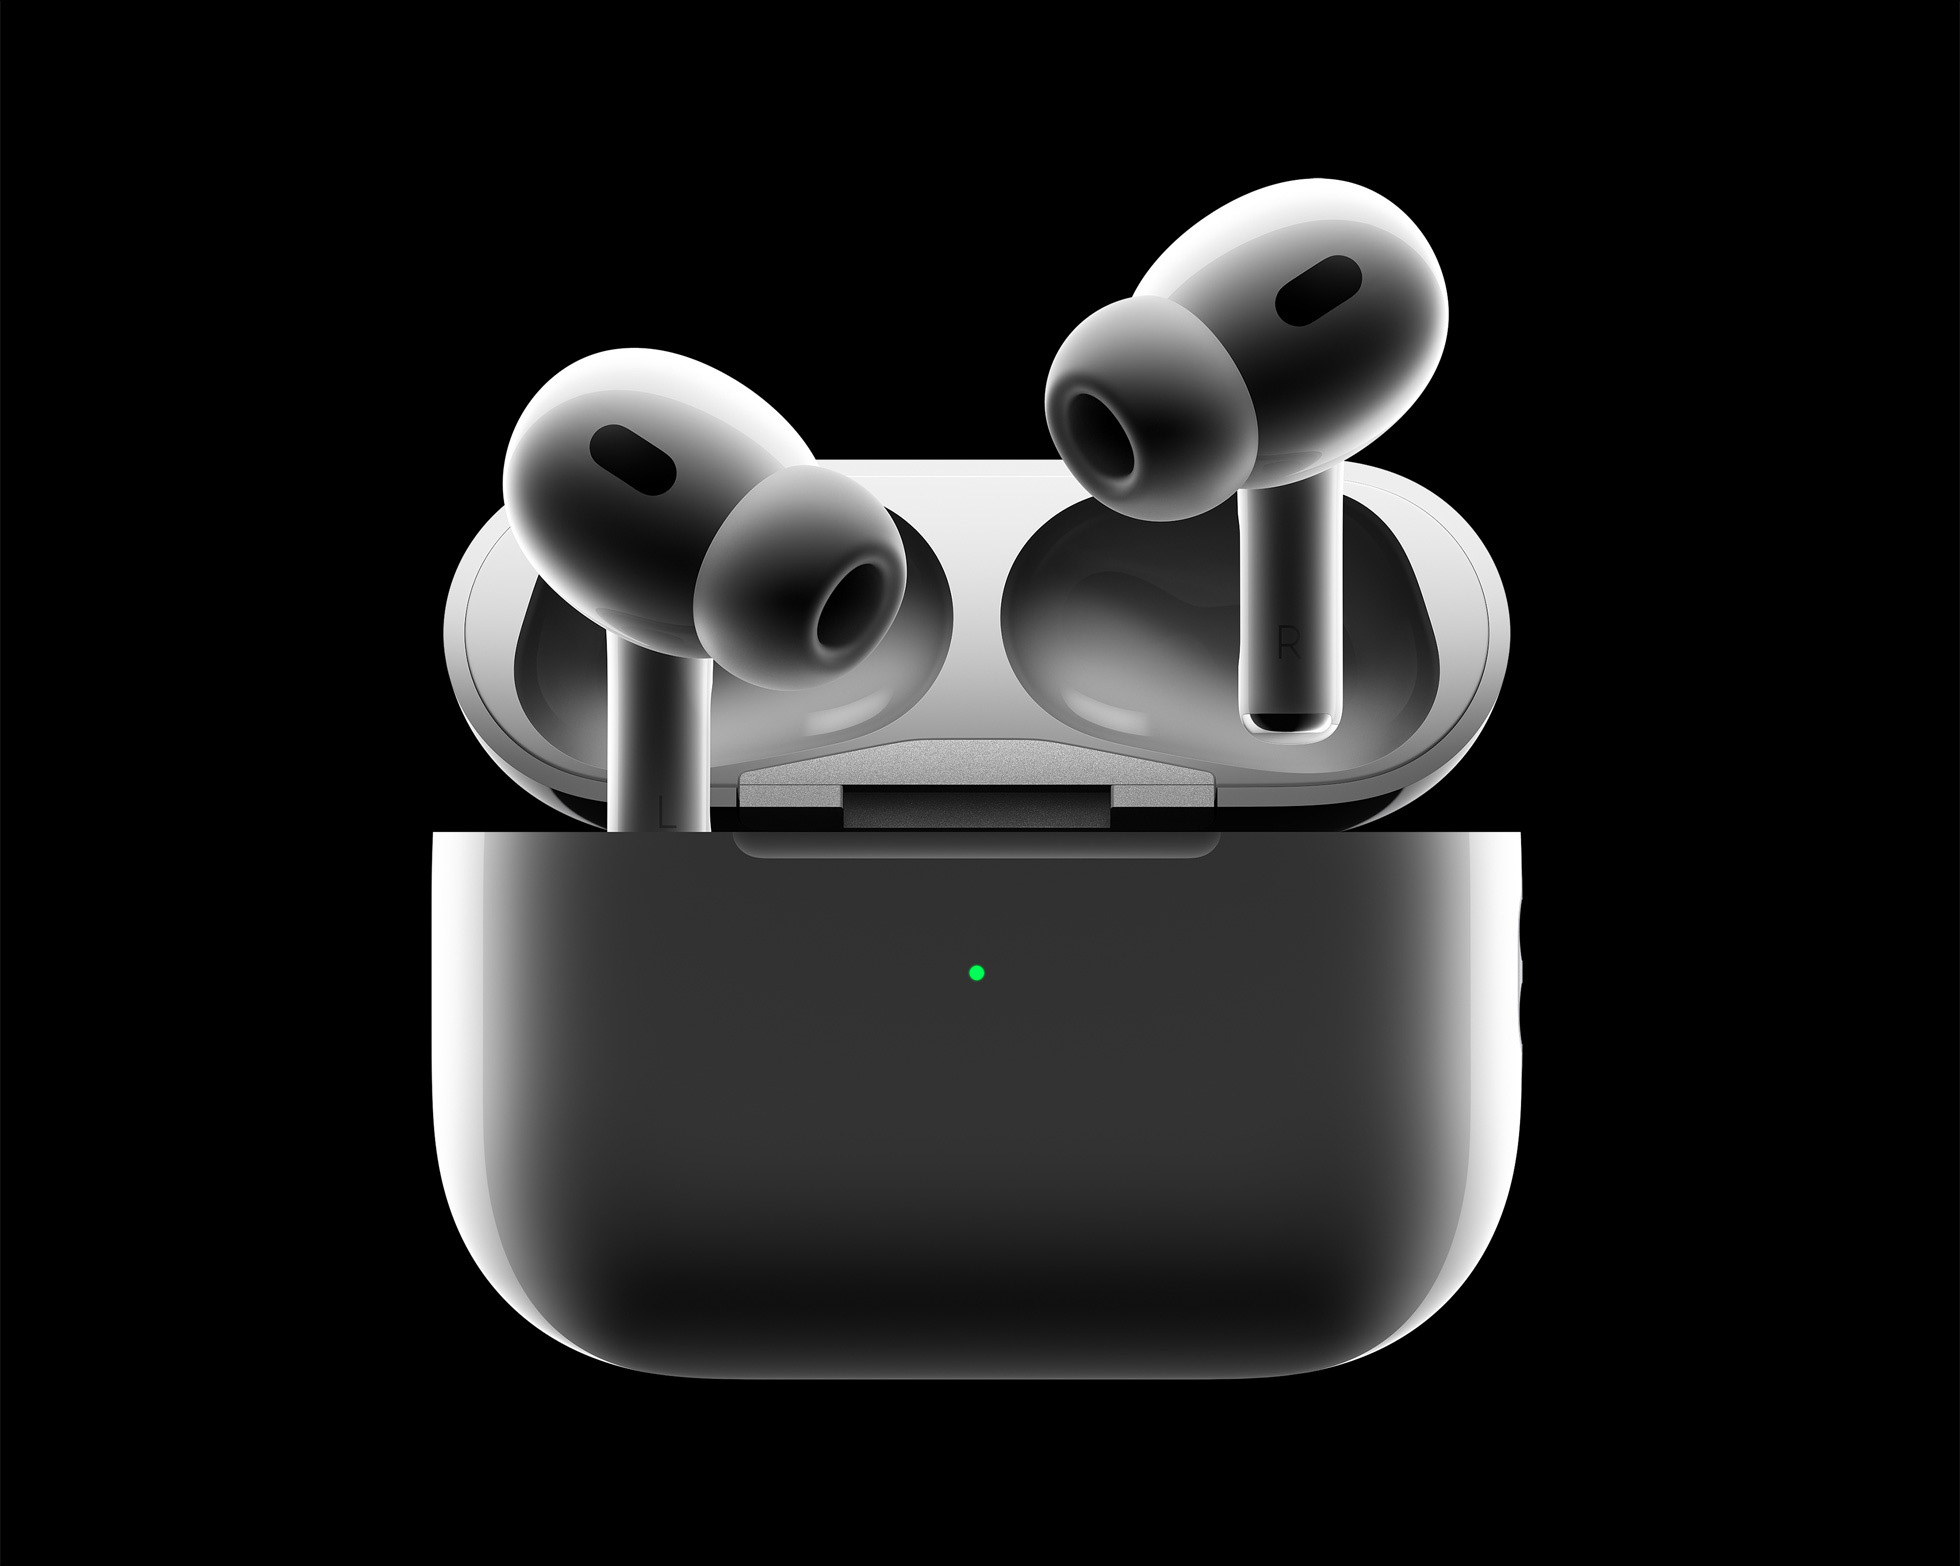 Apple AirPods Pro (second-generation)